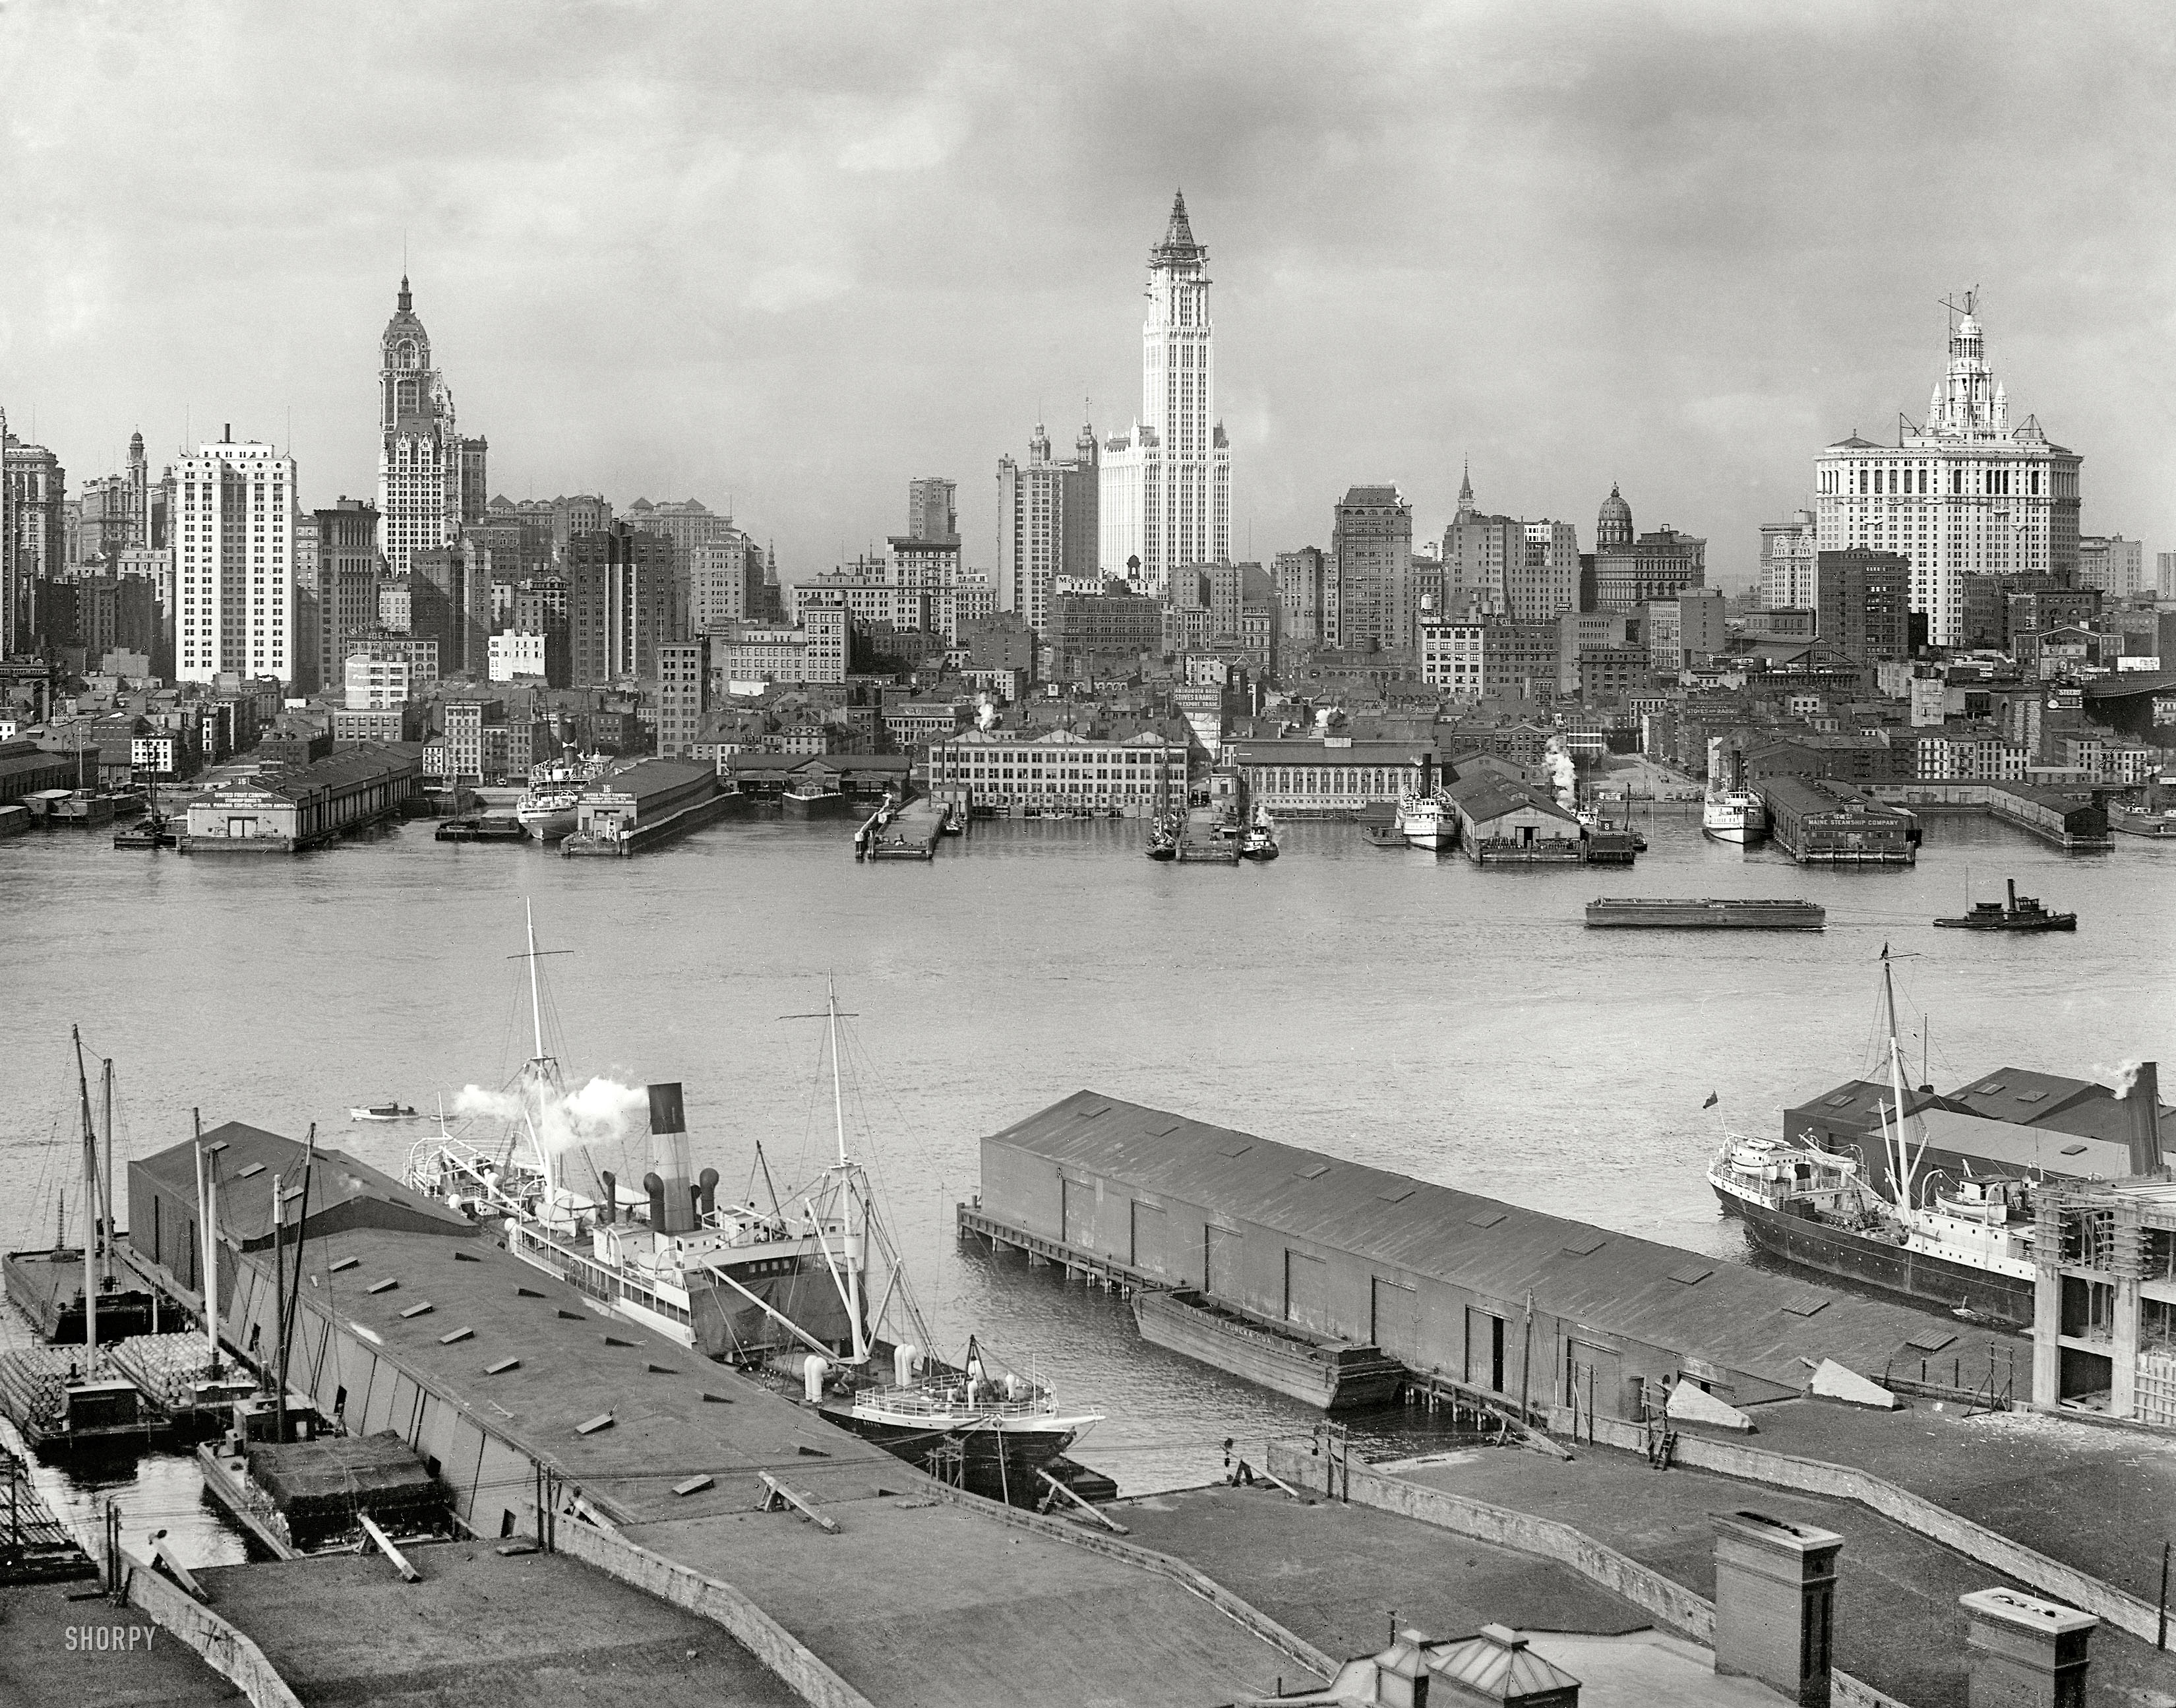 New York circa 1912. "Manhattan skyline from Brooklyn." The Singer Building rises at left along with the Woolworth tower and Municipal Building, both under construction. 8x10 inch glass negative, Detroit Publishing Co. View full size.